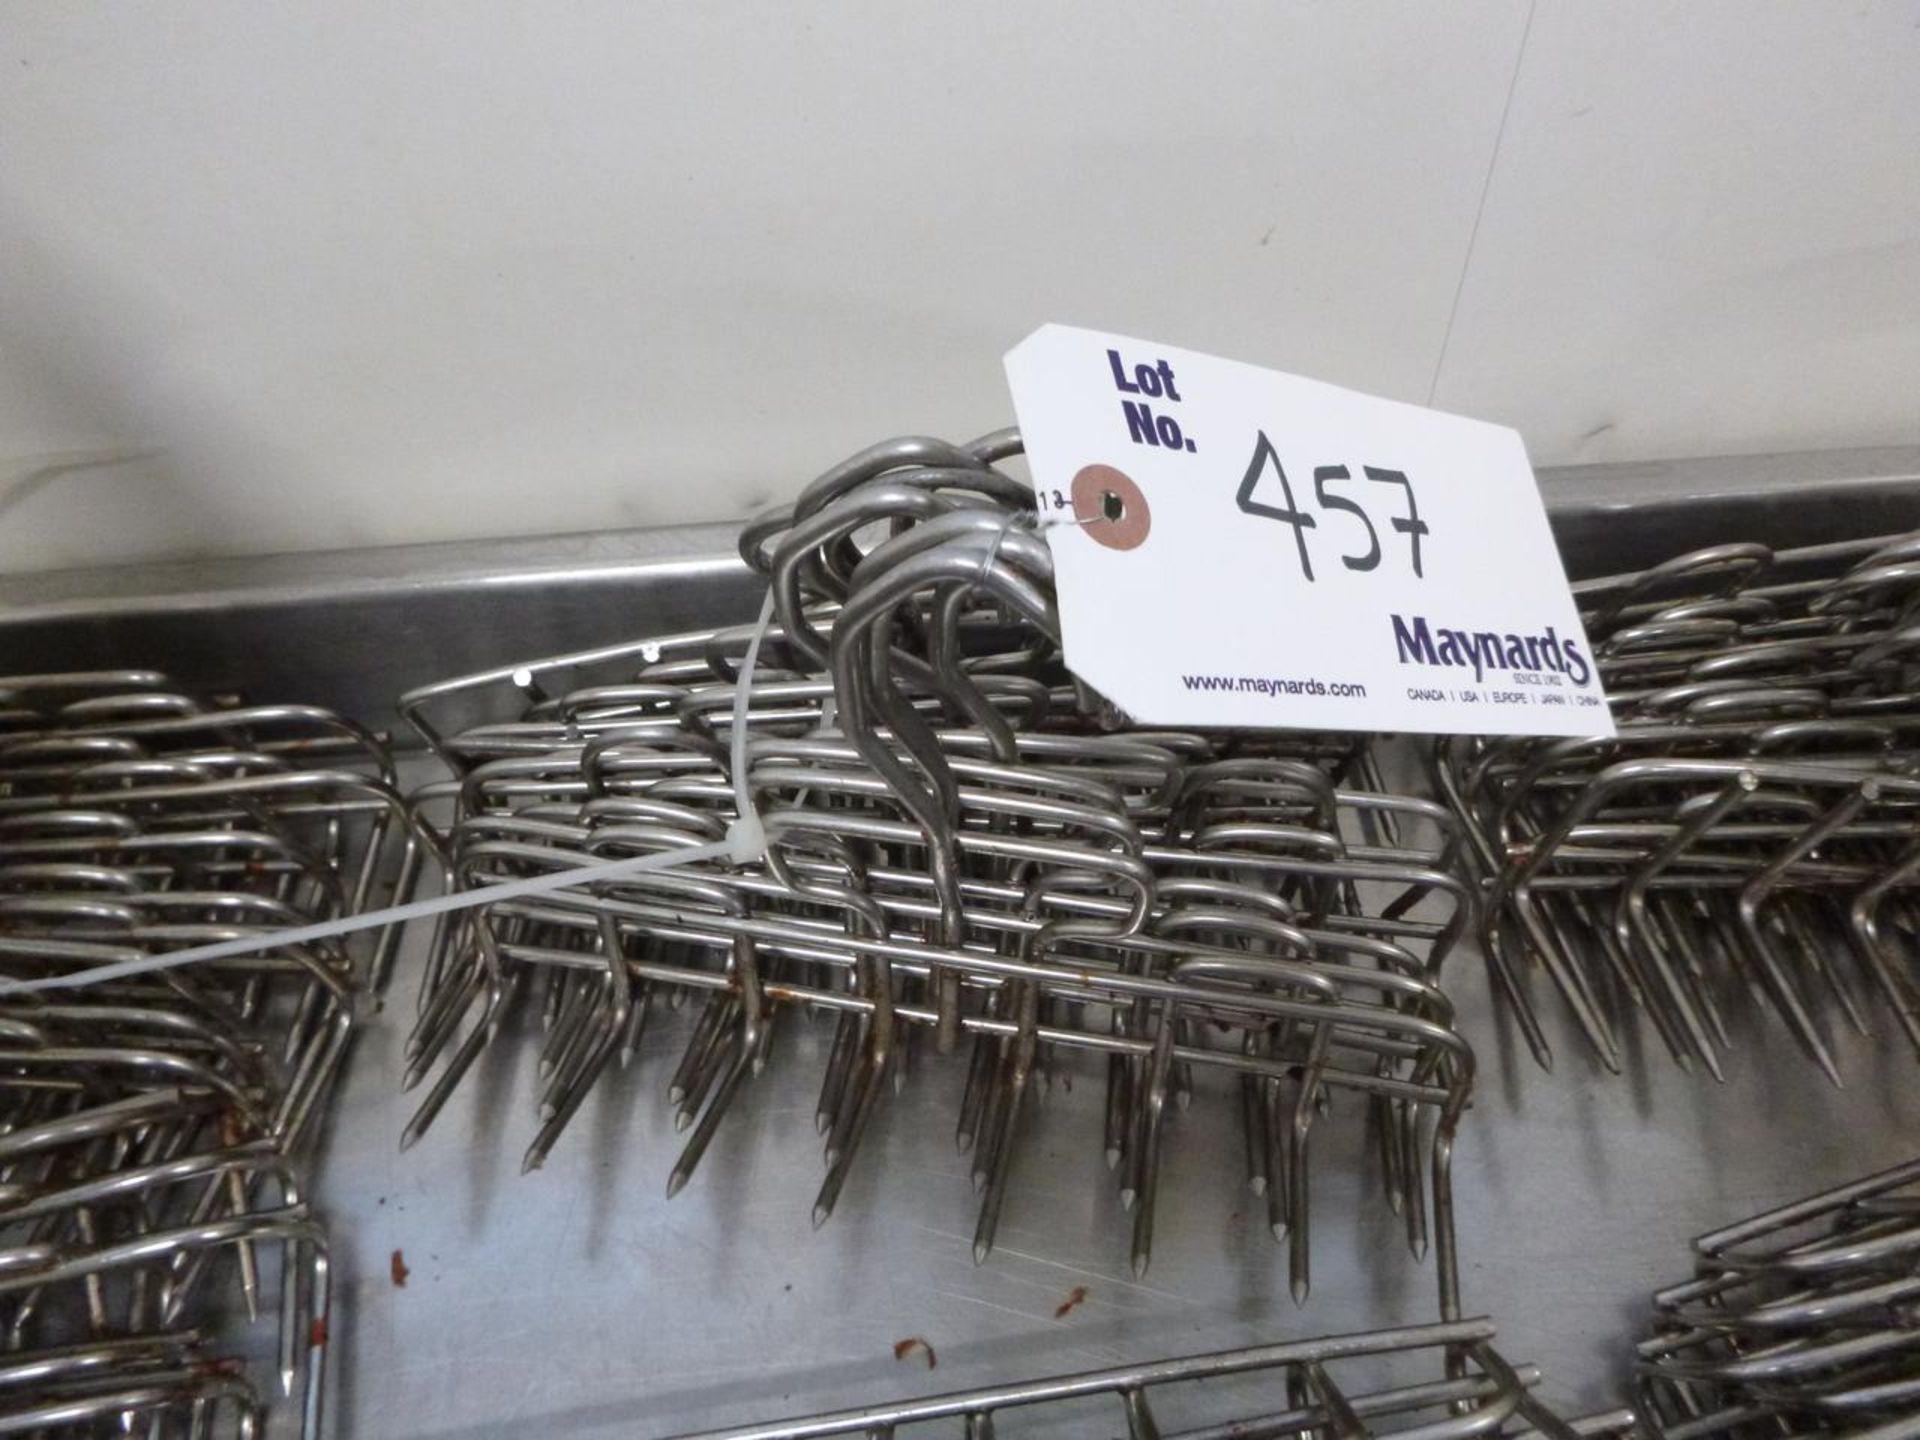 Stainless steel bacon hangers